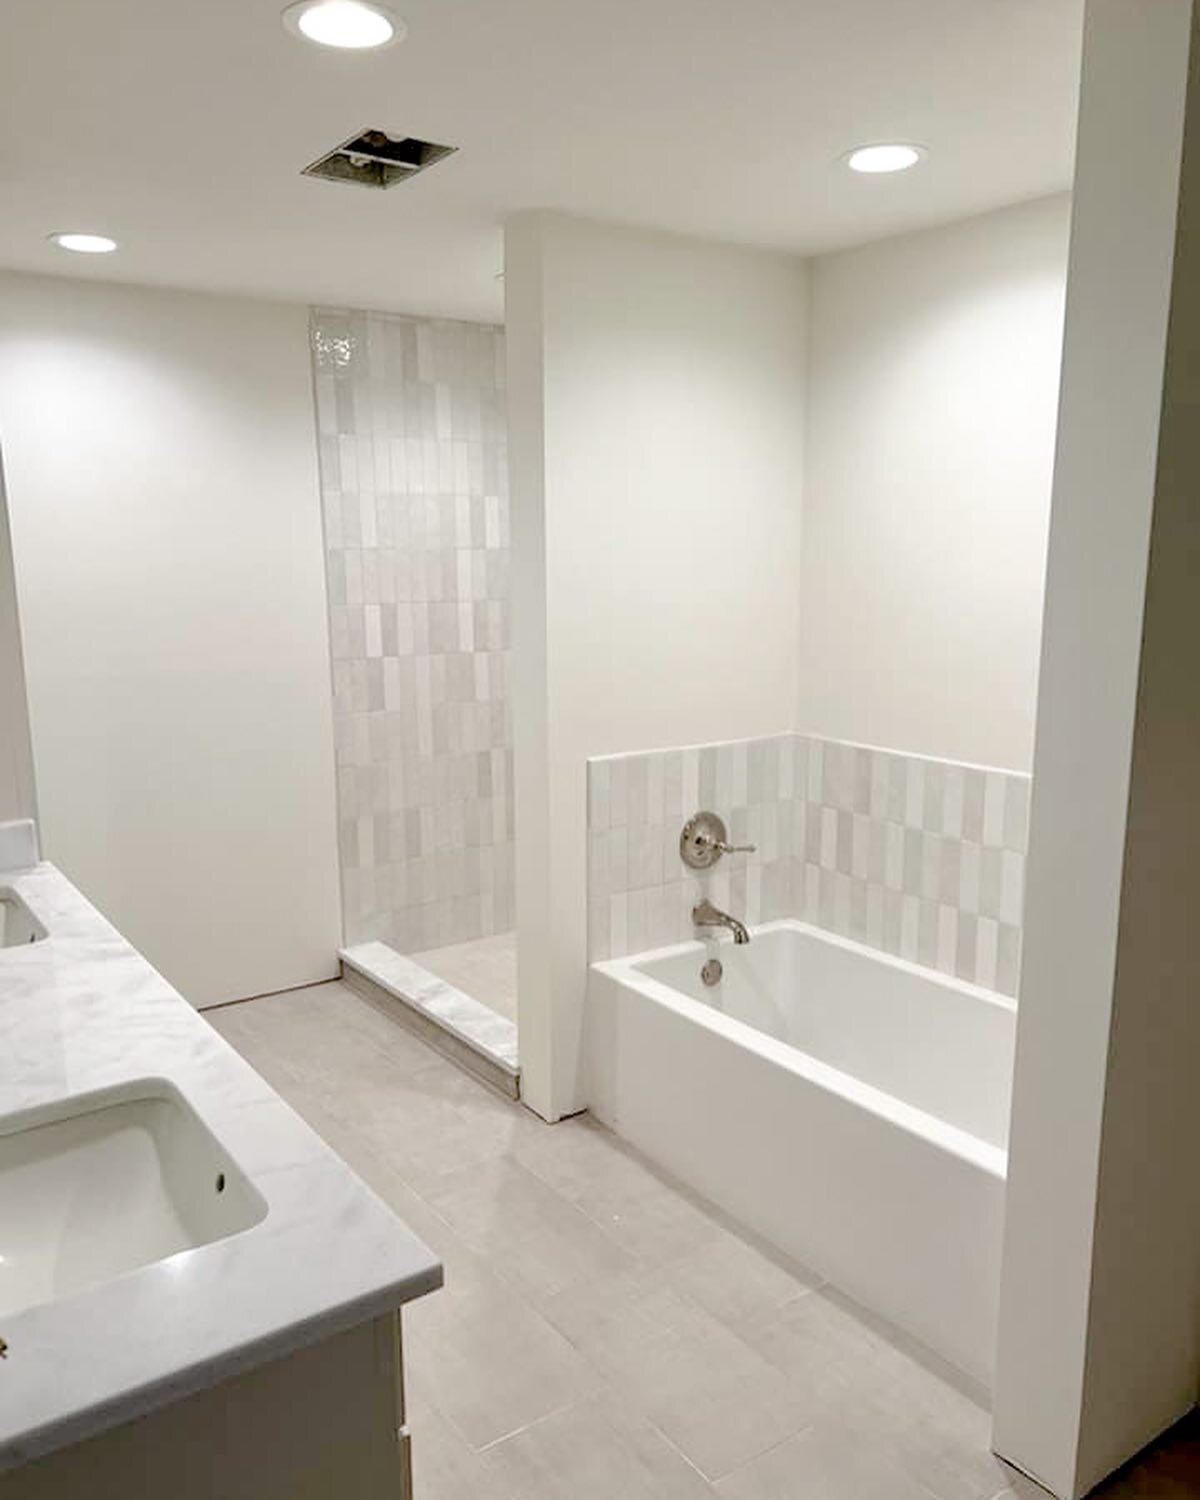 Full bathroom remodel 
We do it all! Call us today for a free quote!